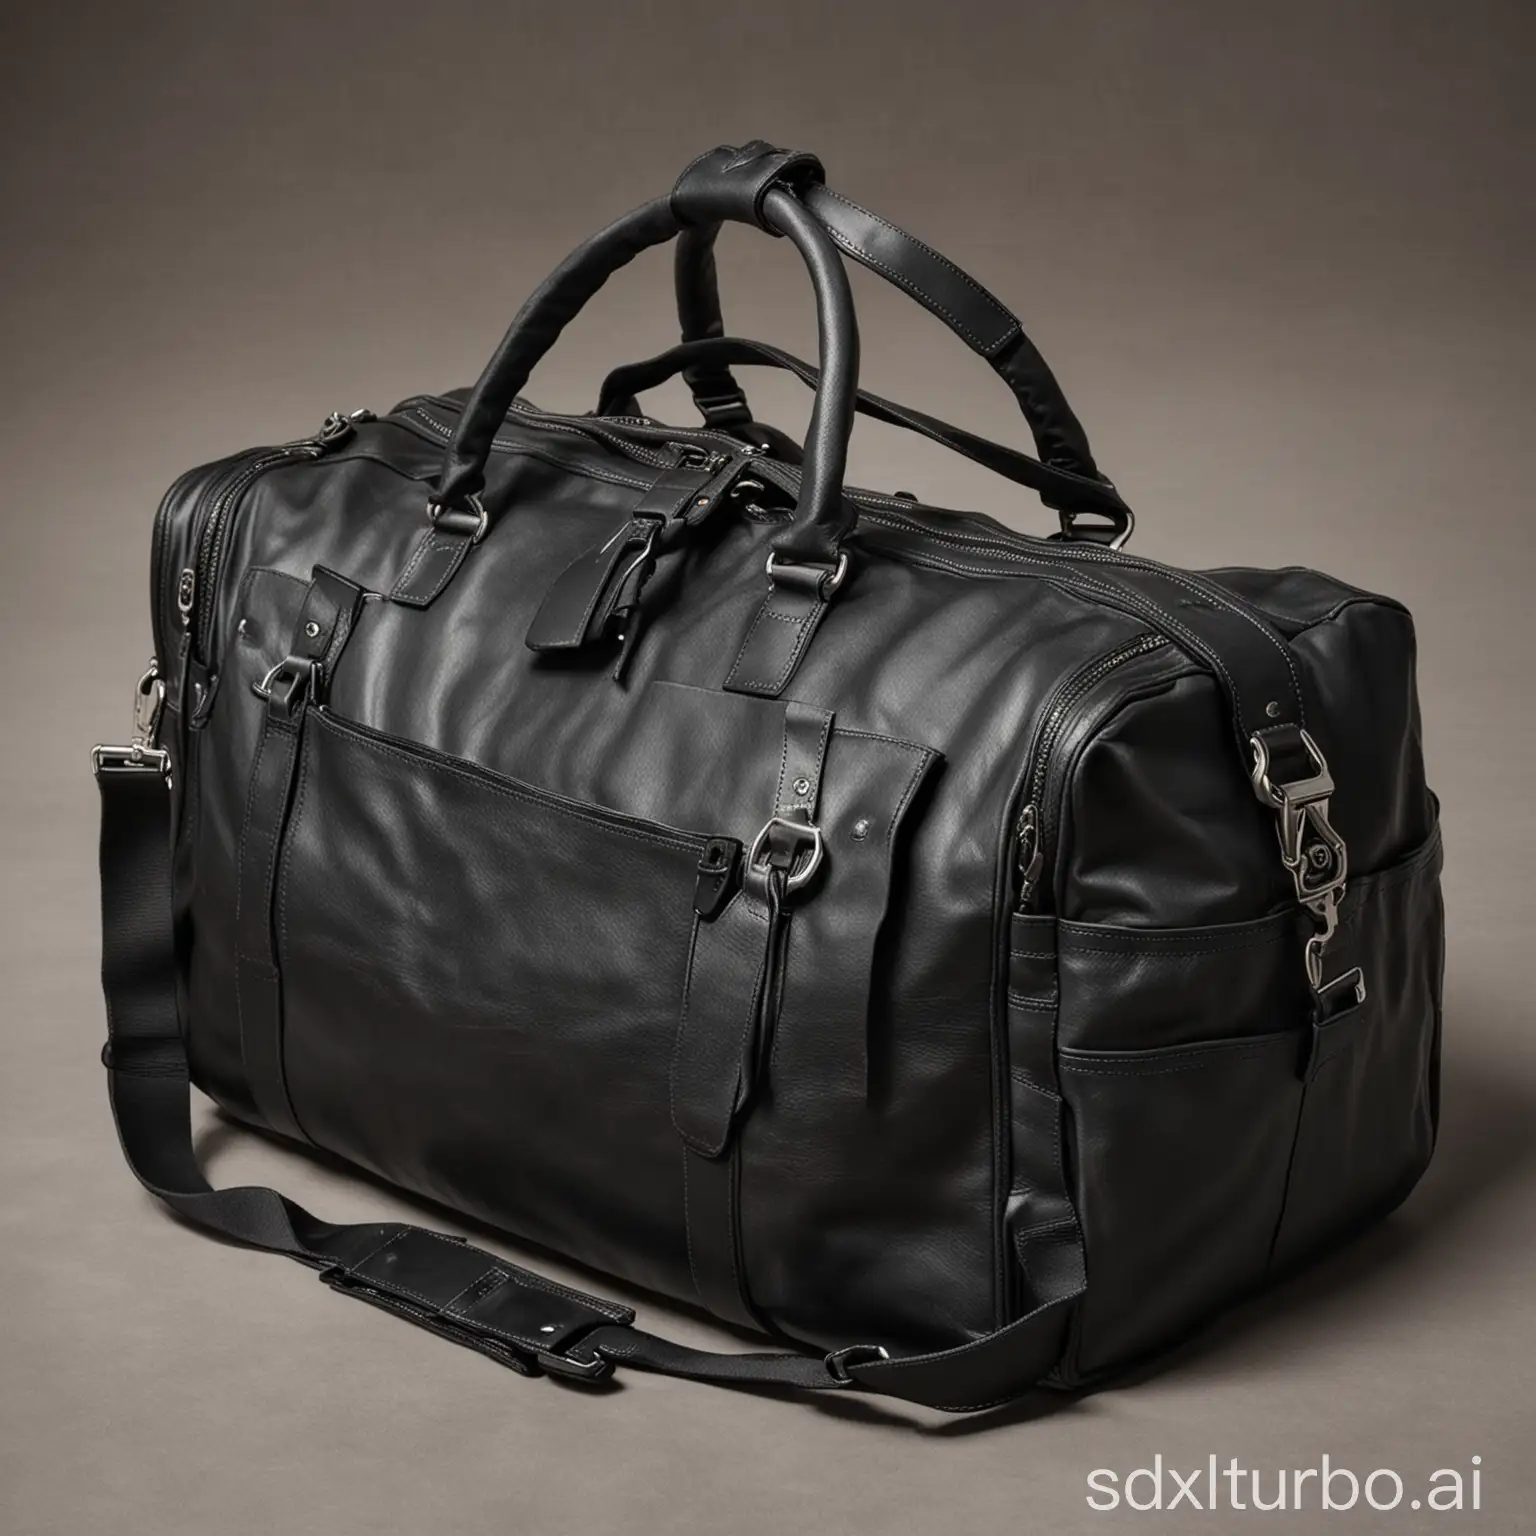 Stylish-Black-Leather-Duffle-Bag-Packed-with-Travel-Essentials